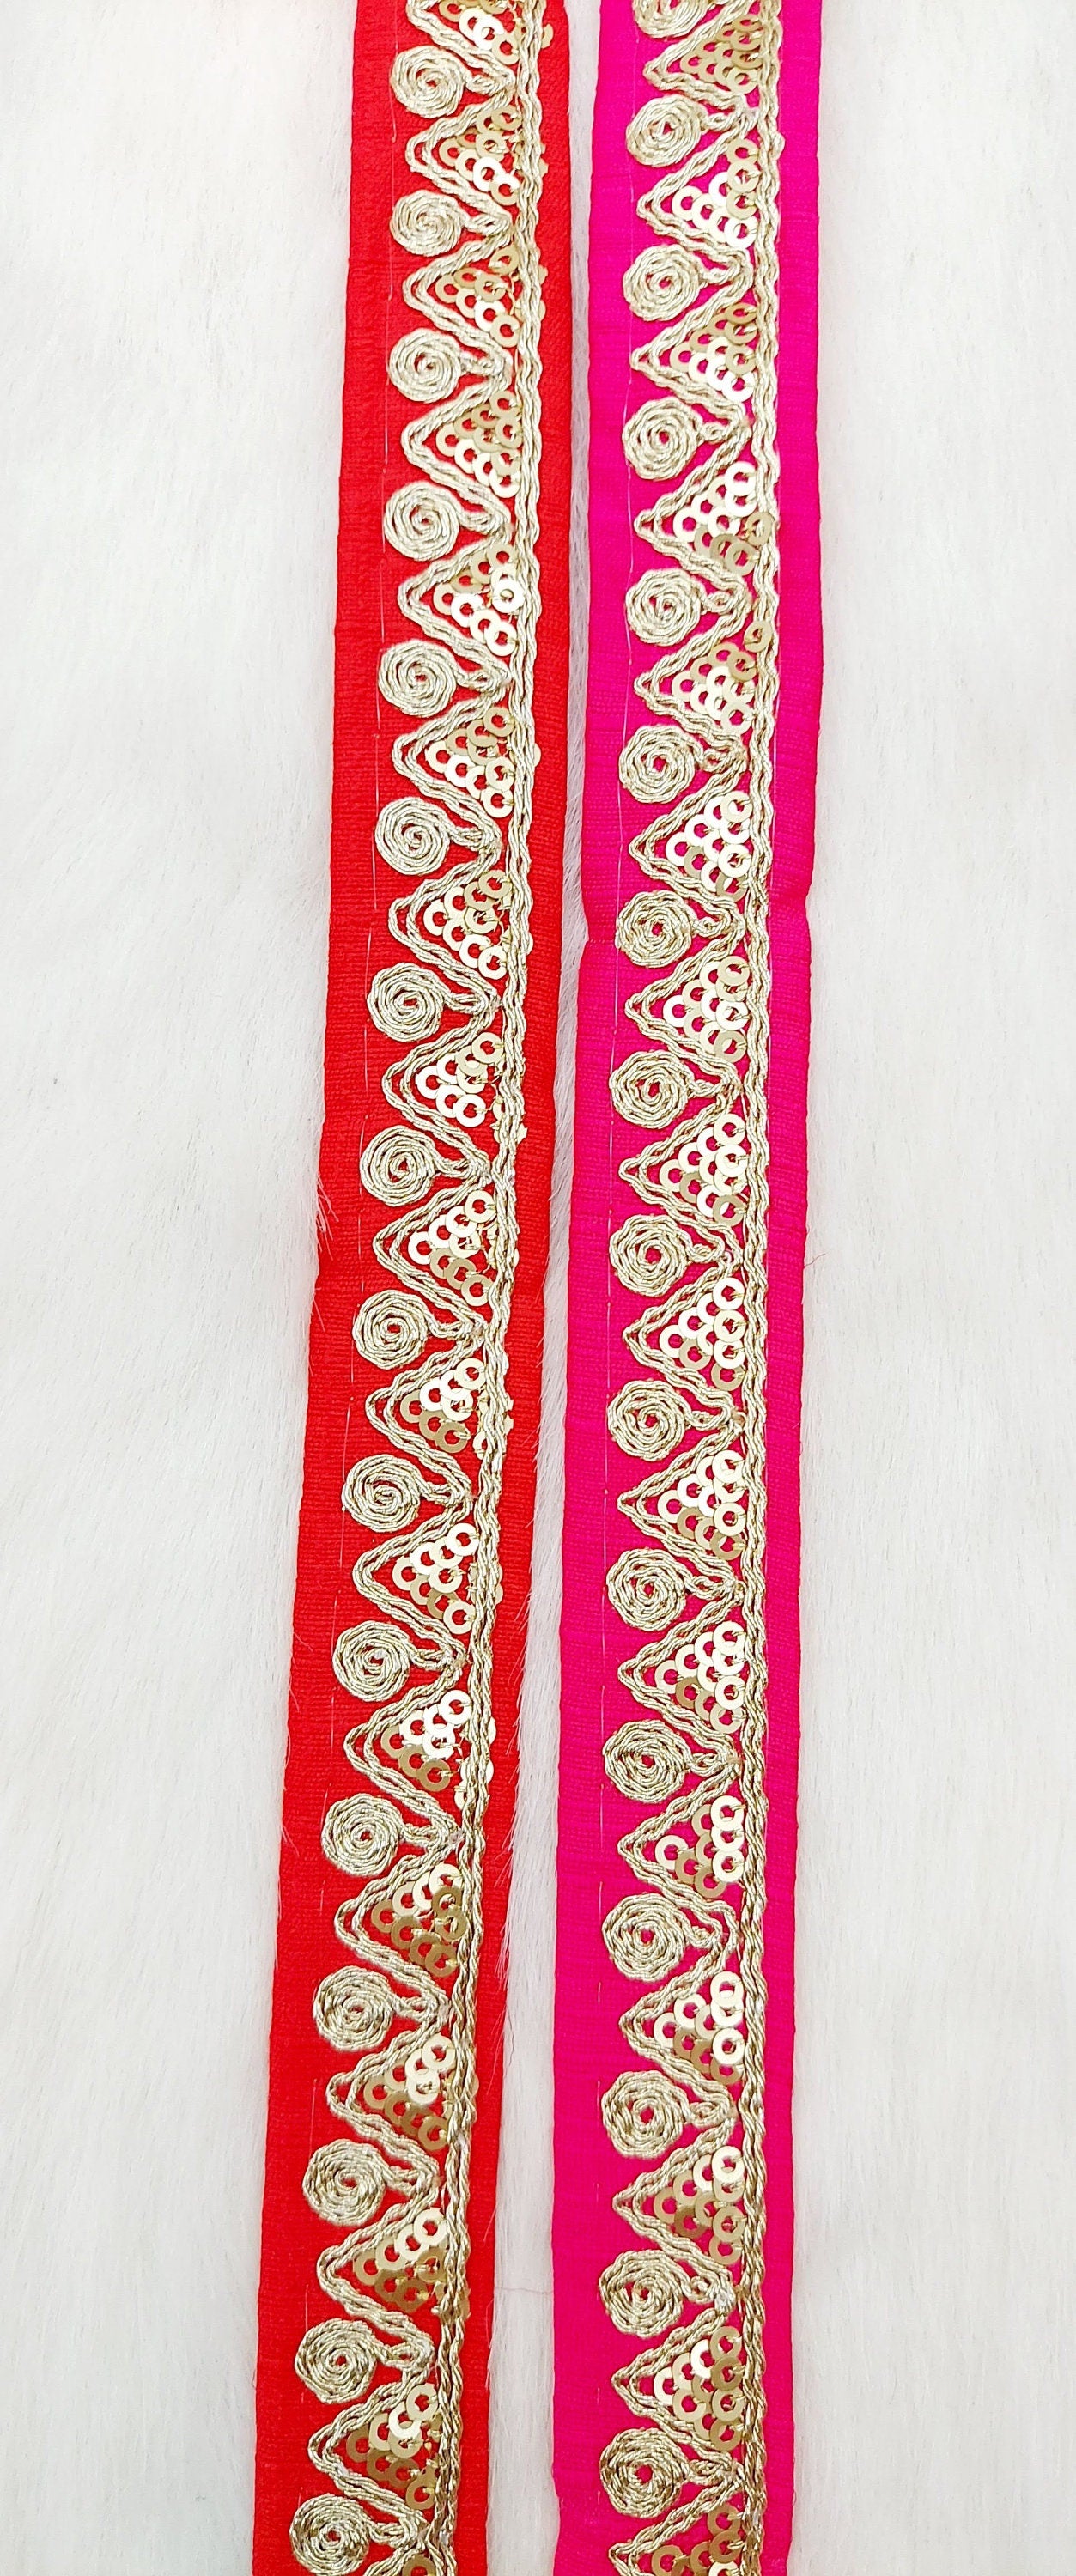 Red Pink Art Silk Trim with Gold Embroidery and Gold Sequins Indian Sari Border Trim By 3 Yards Decorative Trim Craft Lace